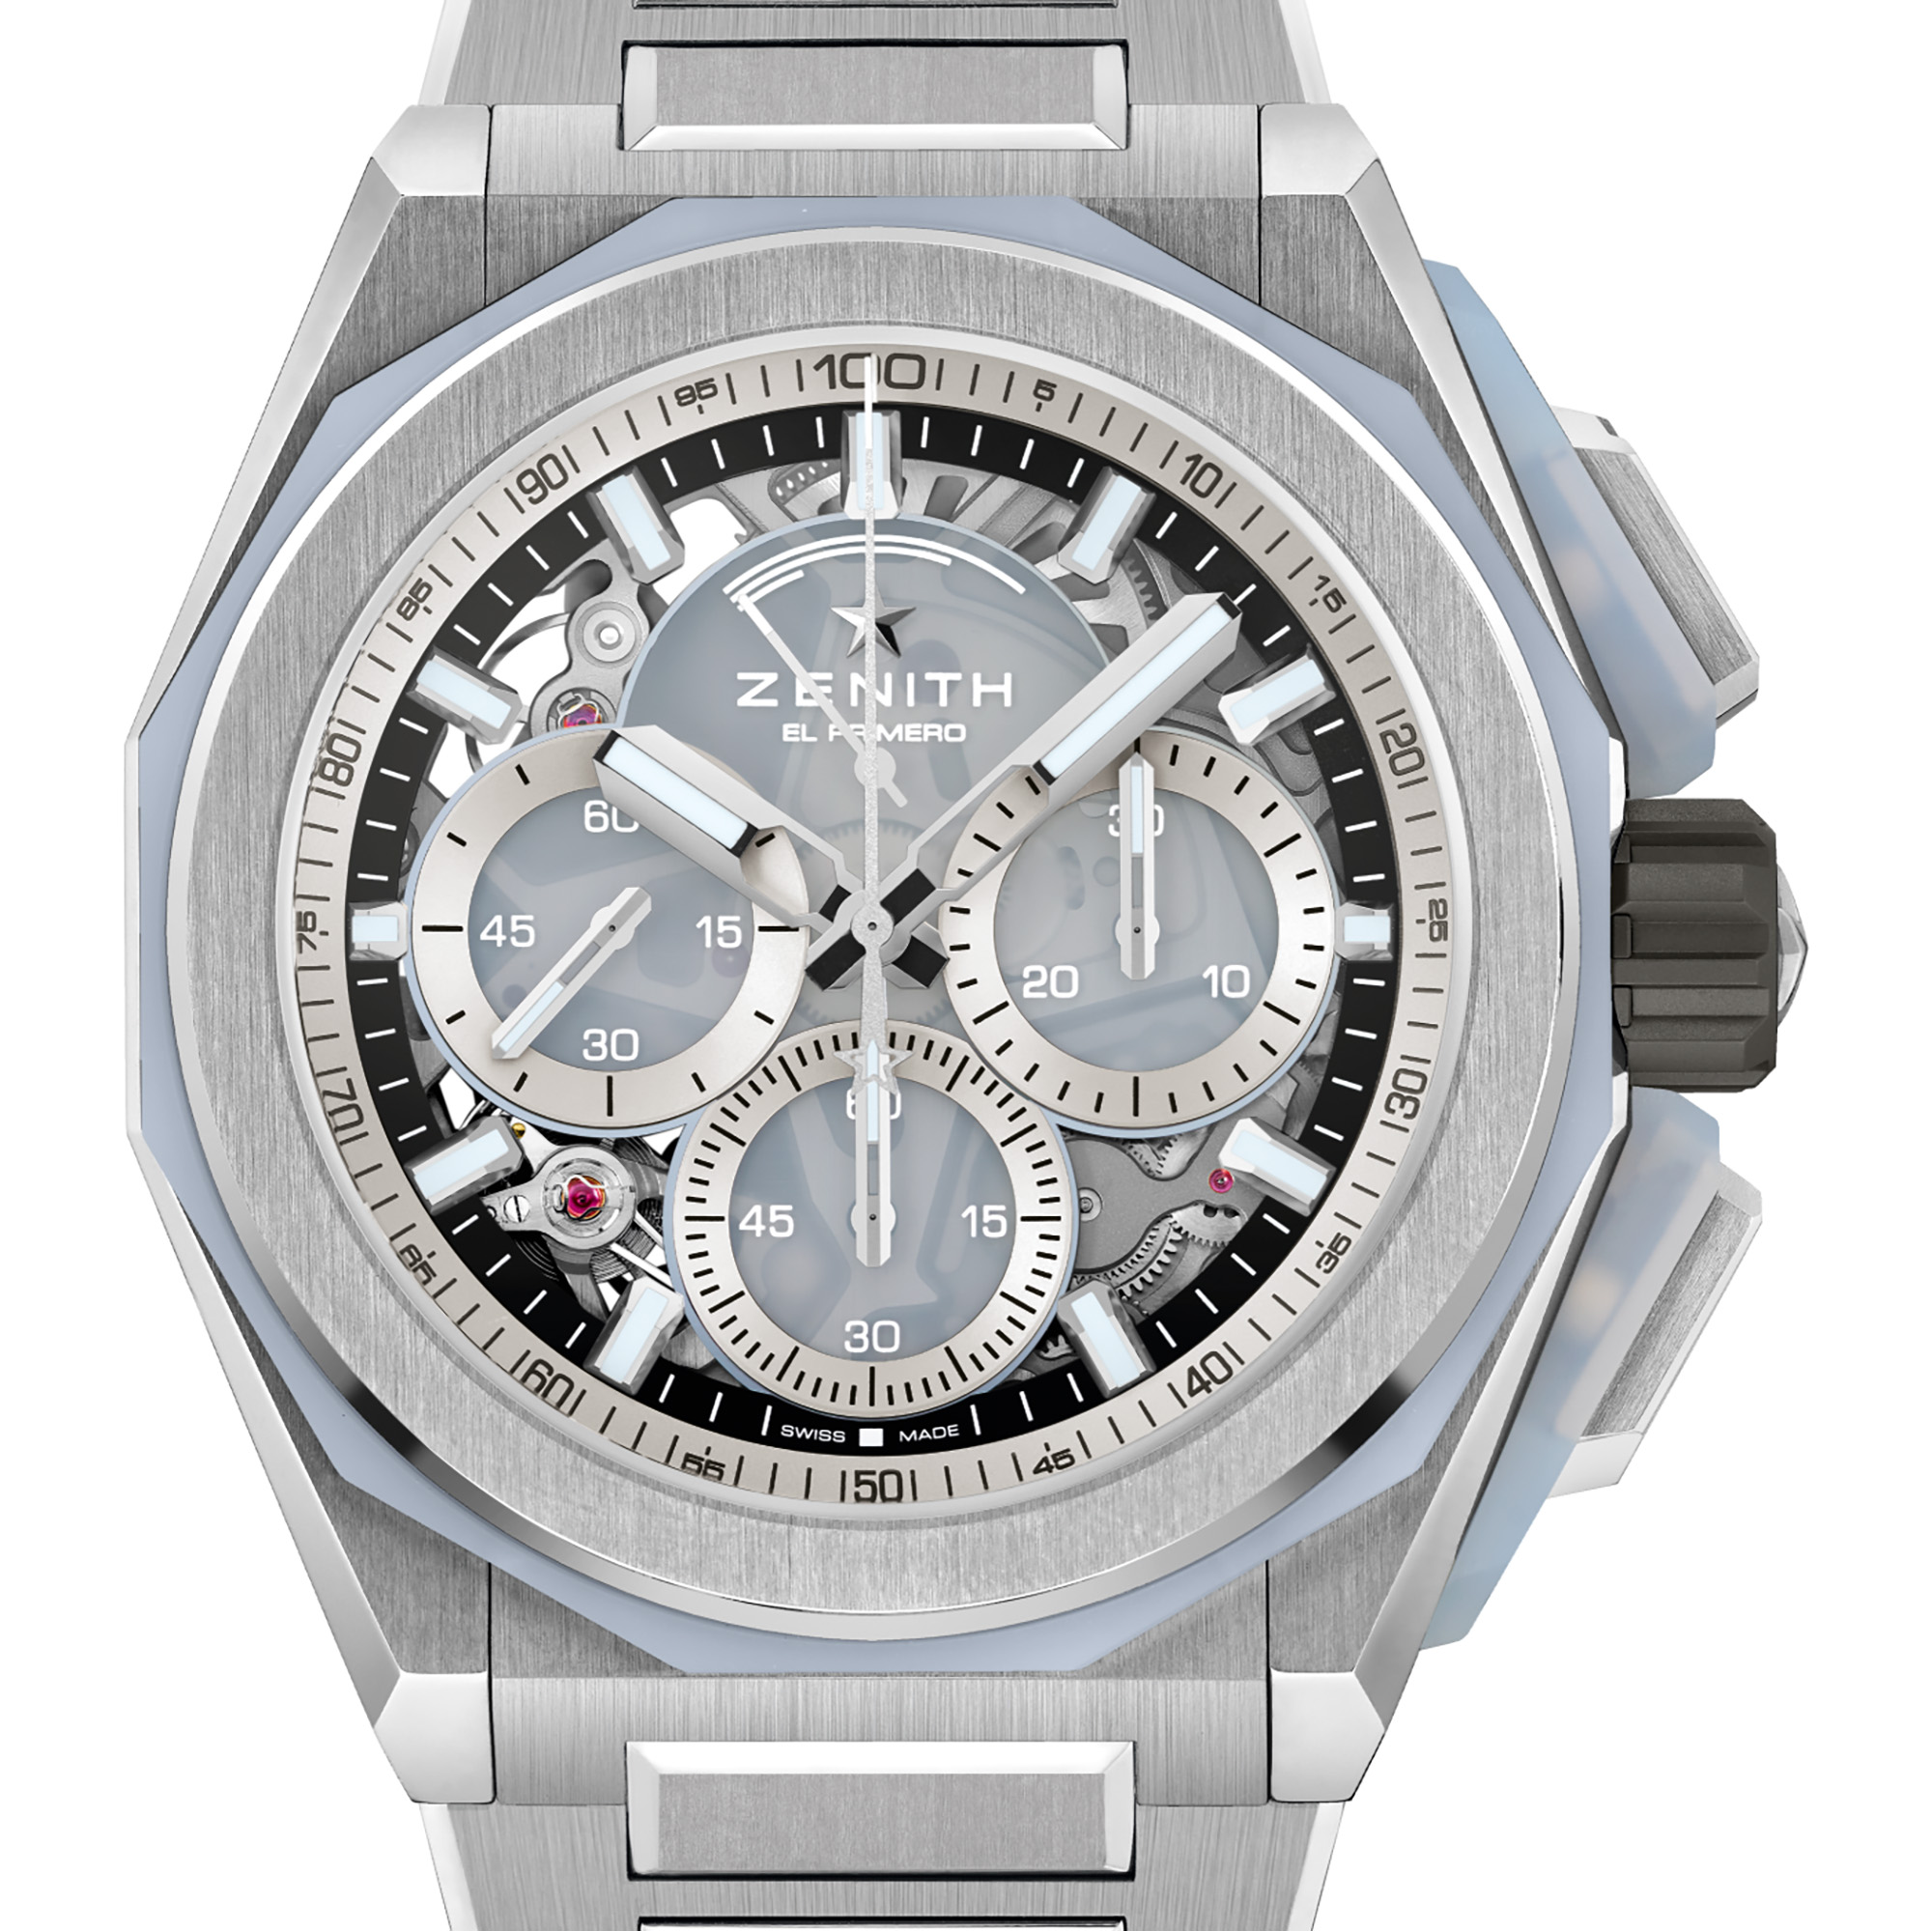 Zenith Defy Xtreme Open Sea Limited Edition